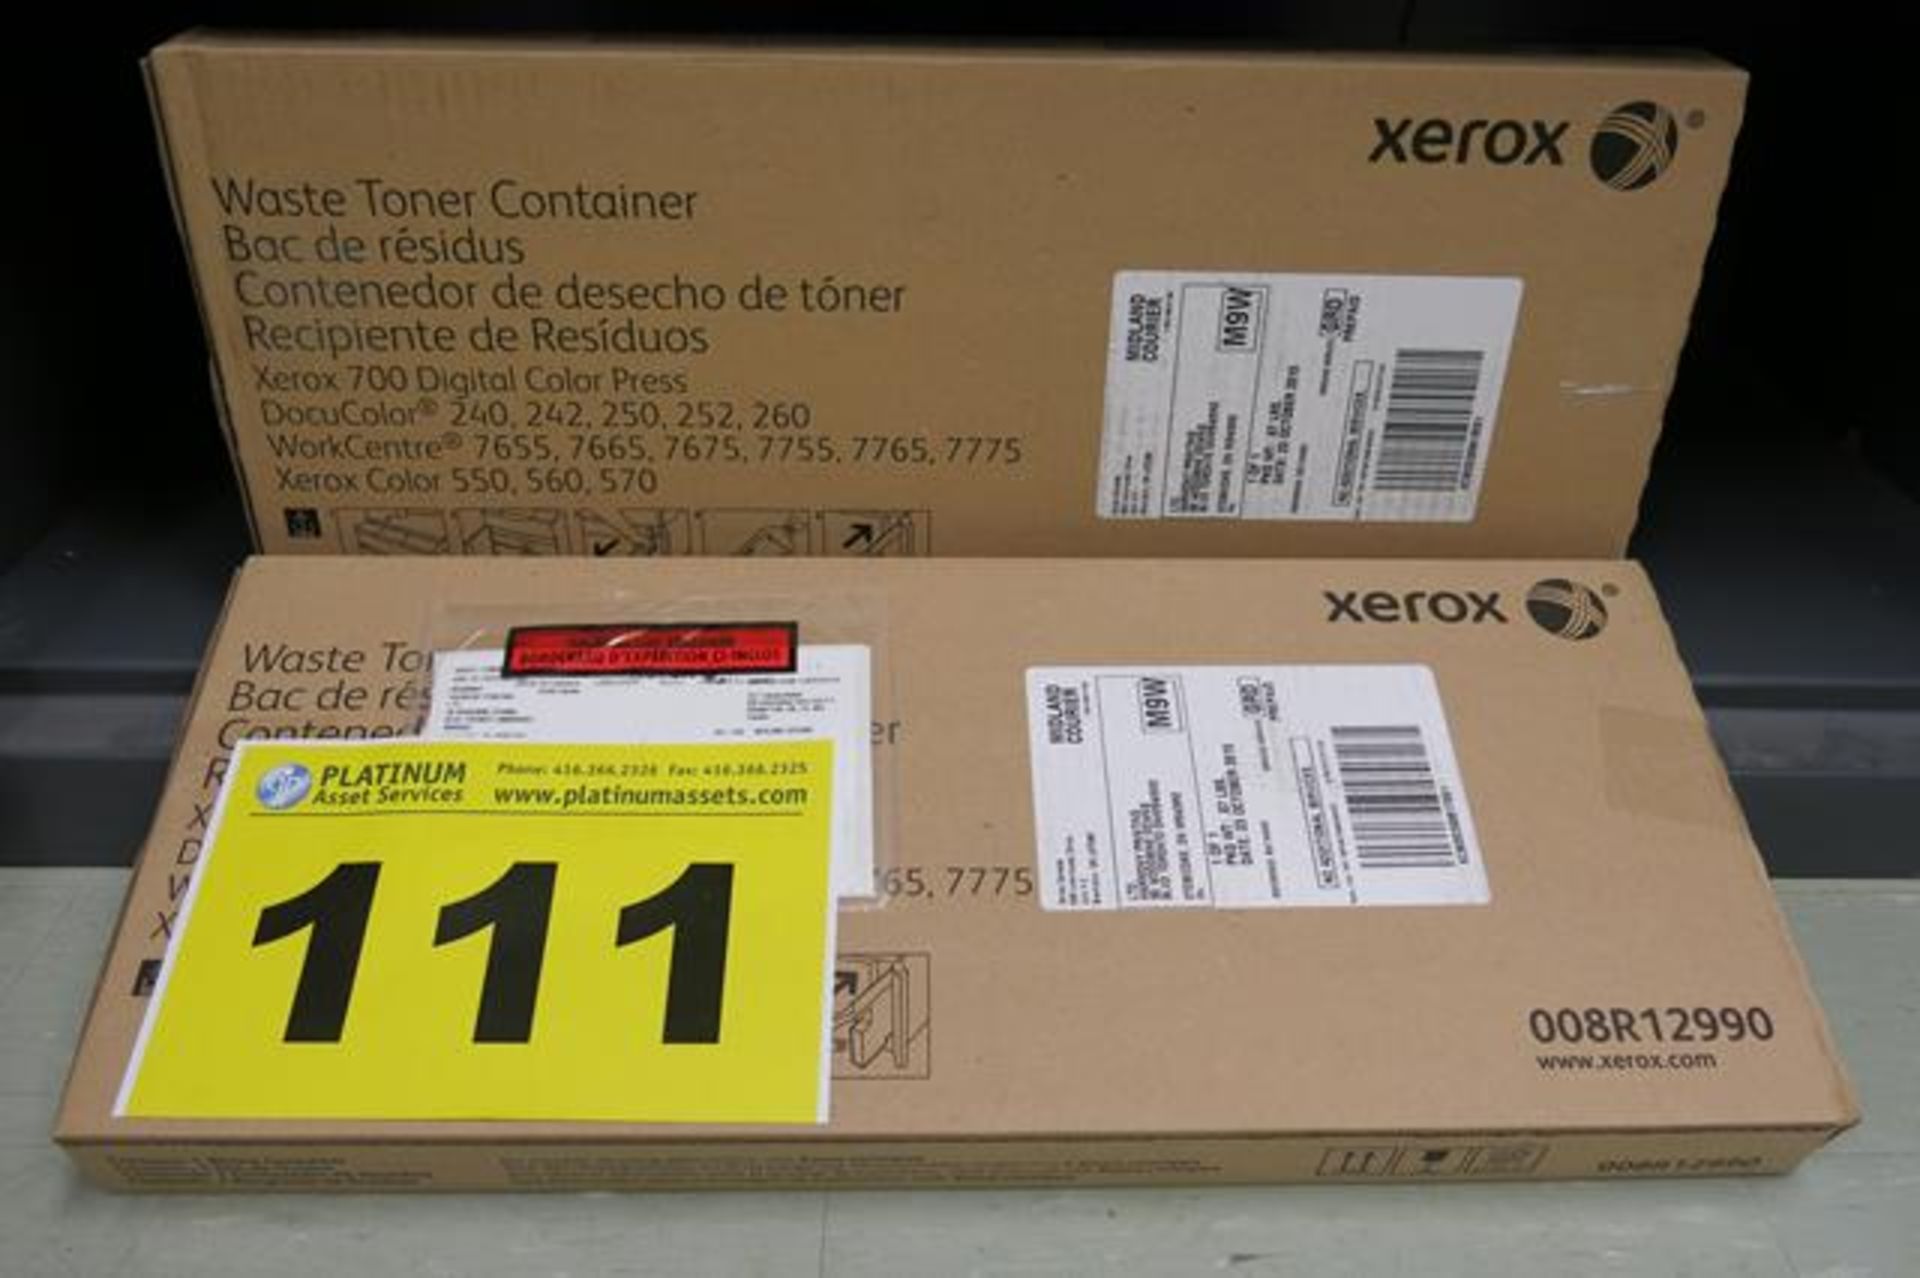 XEROX, 008R12990, WASTE TONER CONTAINER